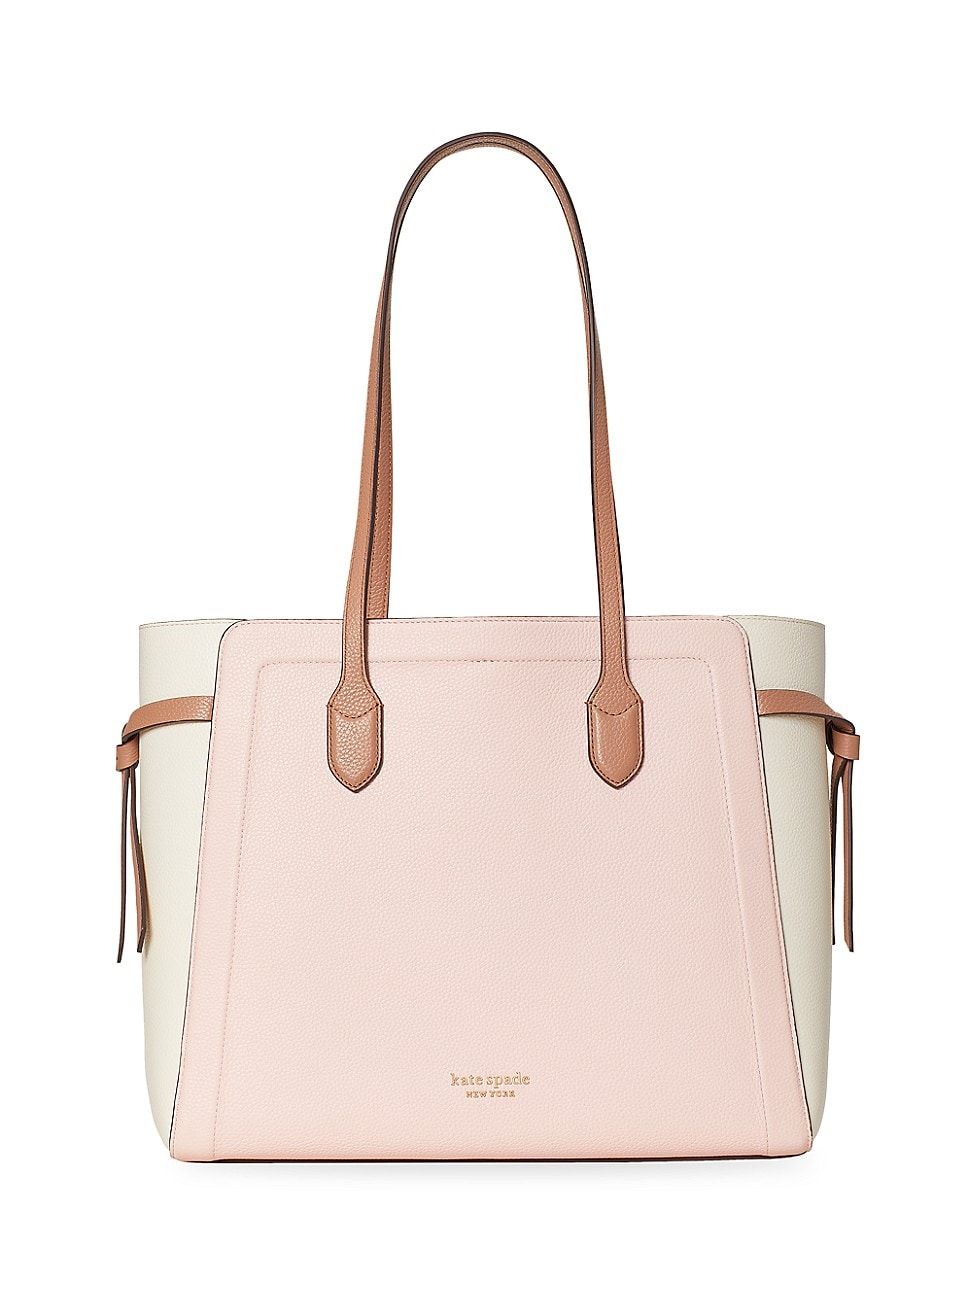 kate spade new york Knott Large Leather Tote | Saks Fifth Avenue